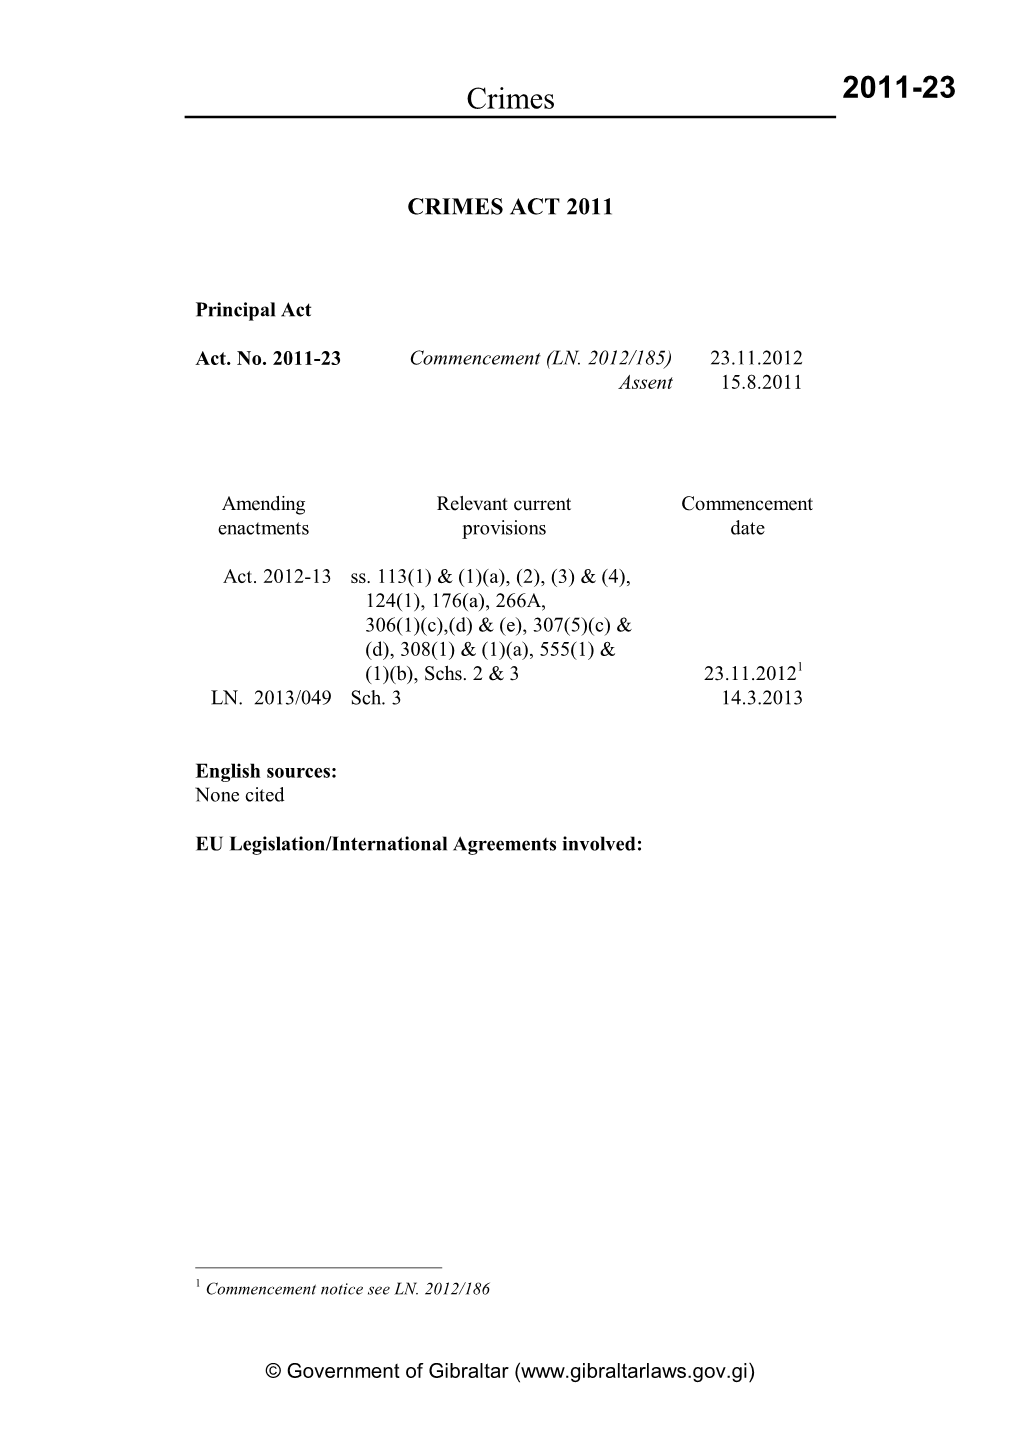 PDF of Act As Amended to LN. 2013/049